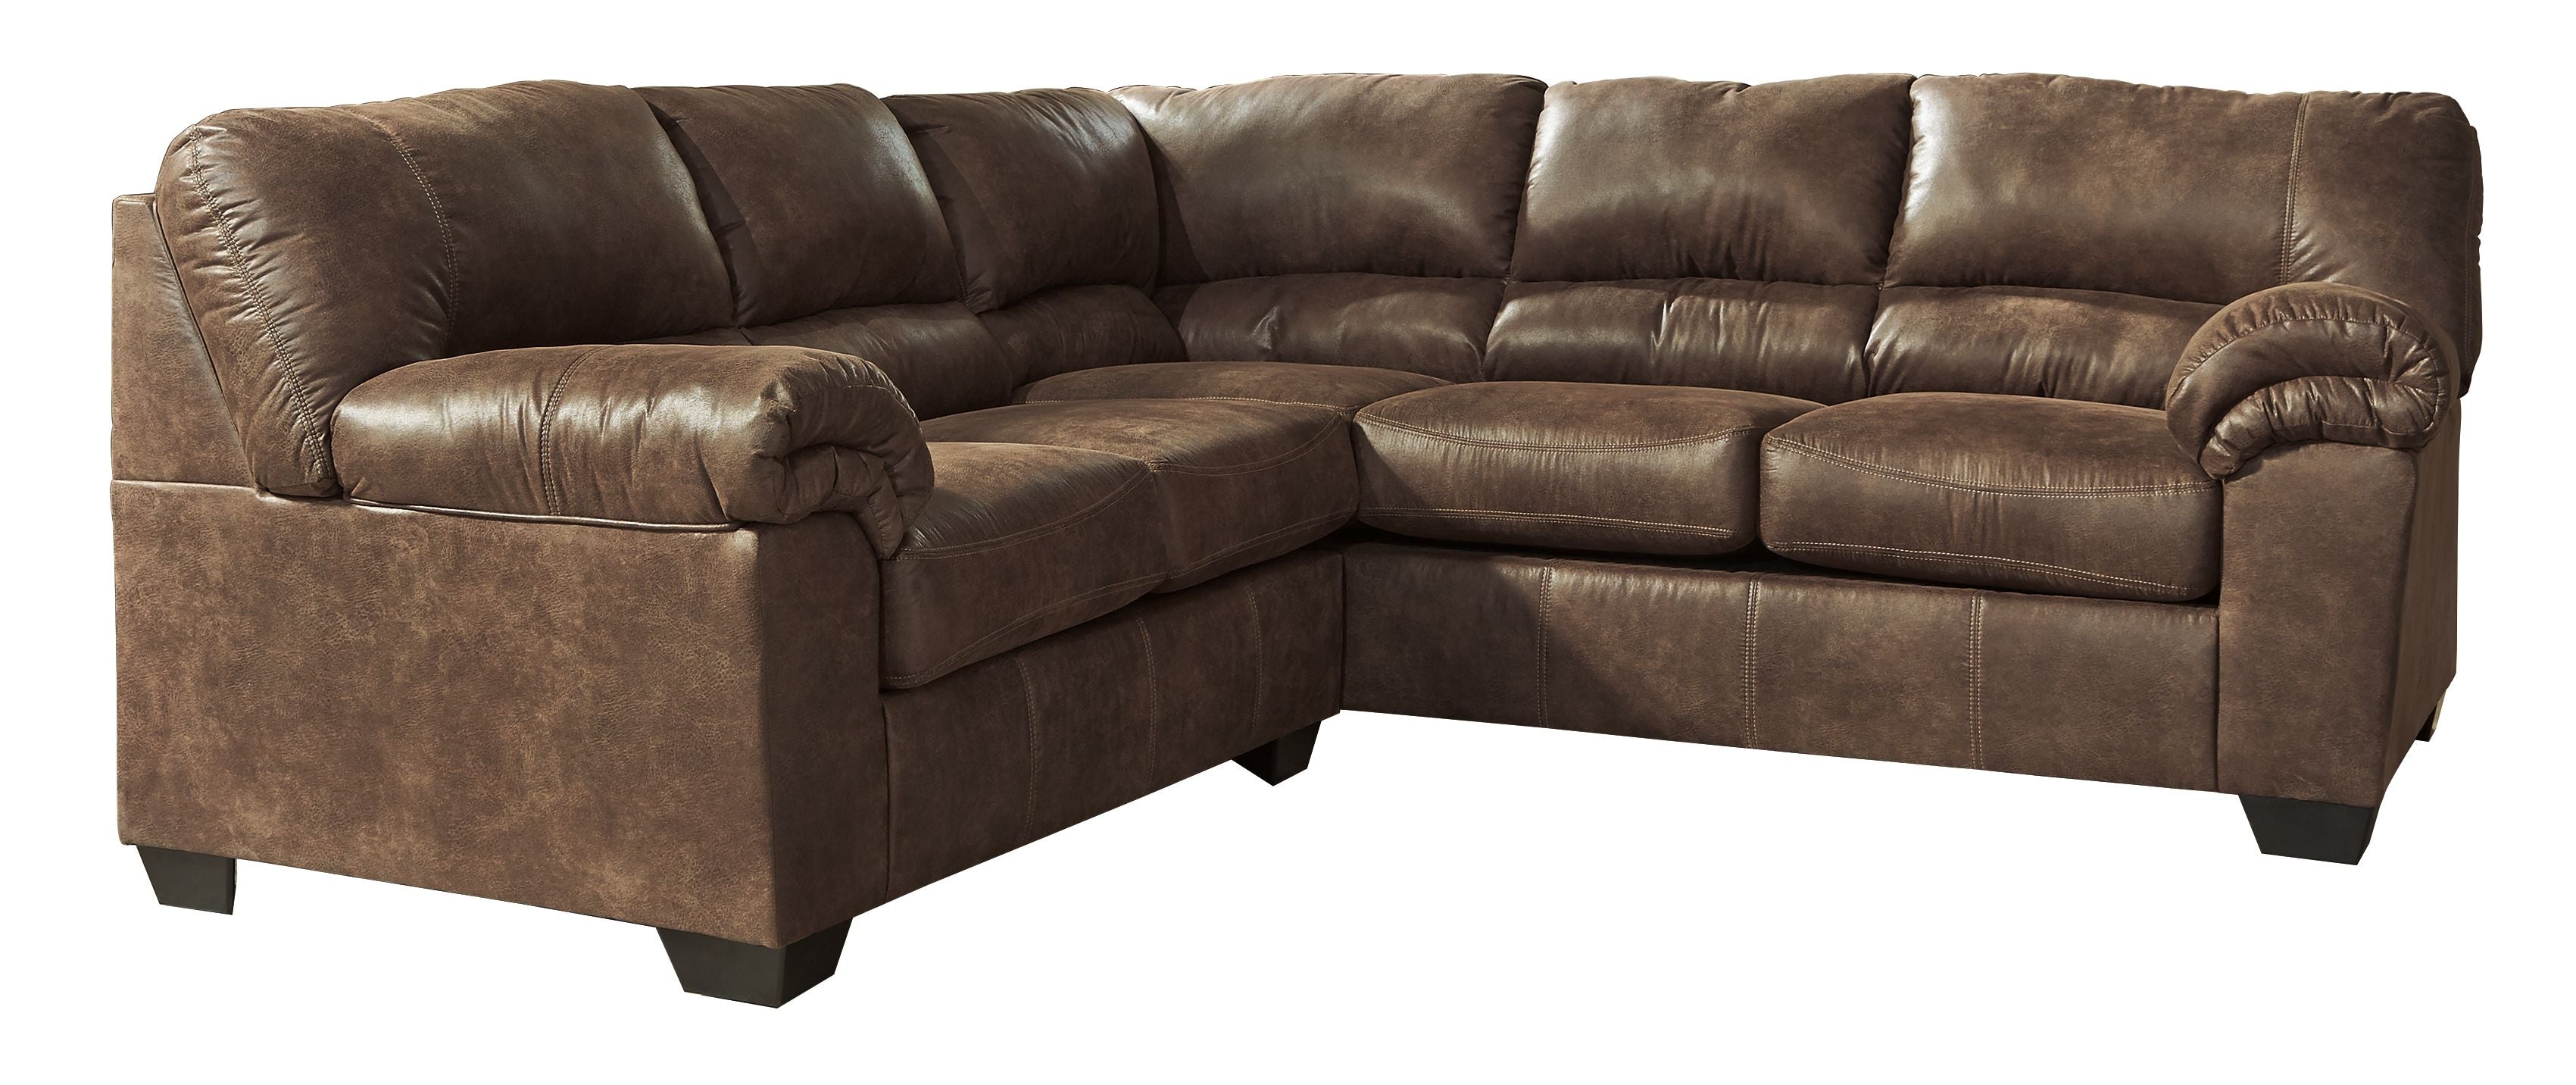 Bladen - Loveseat Sectional-Stationary Sectionals-American Furniture Outlet